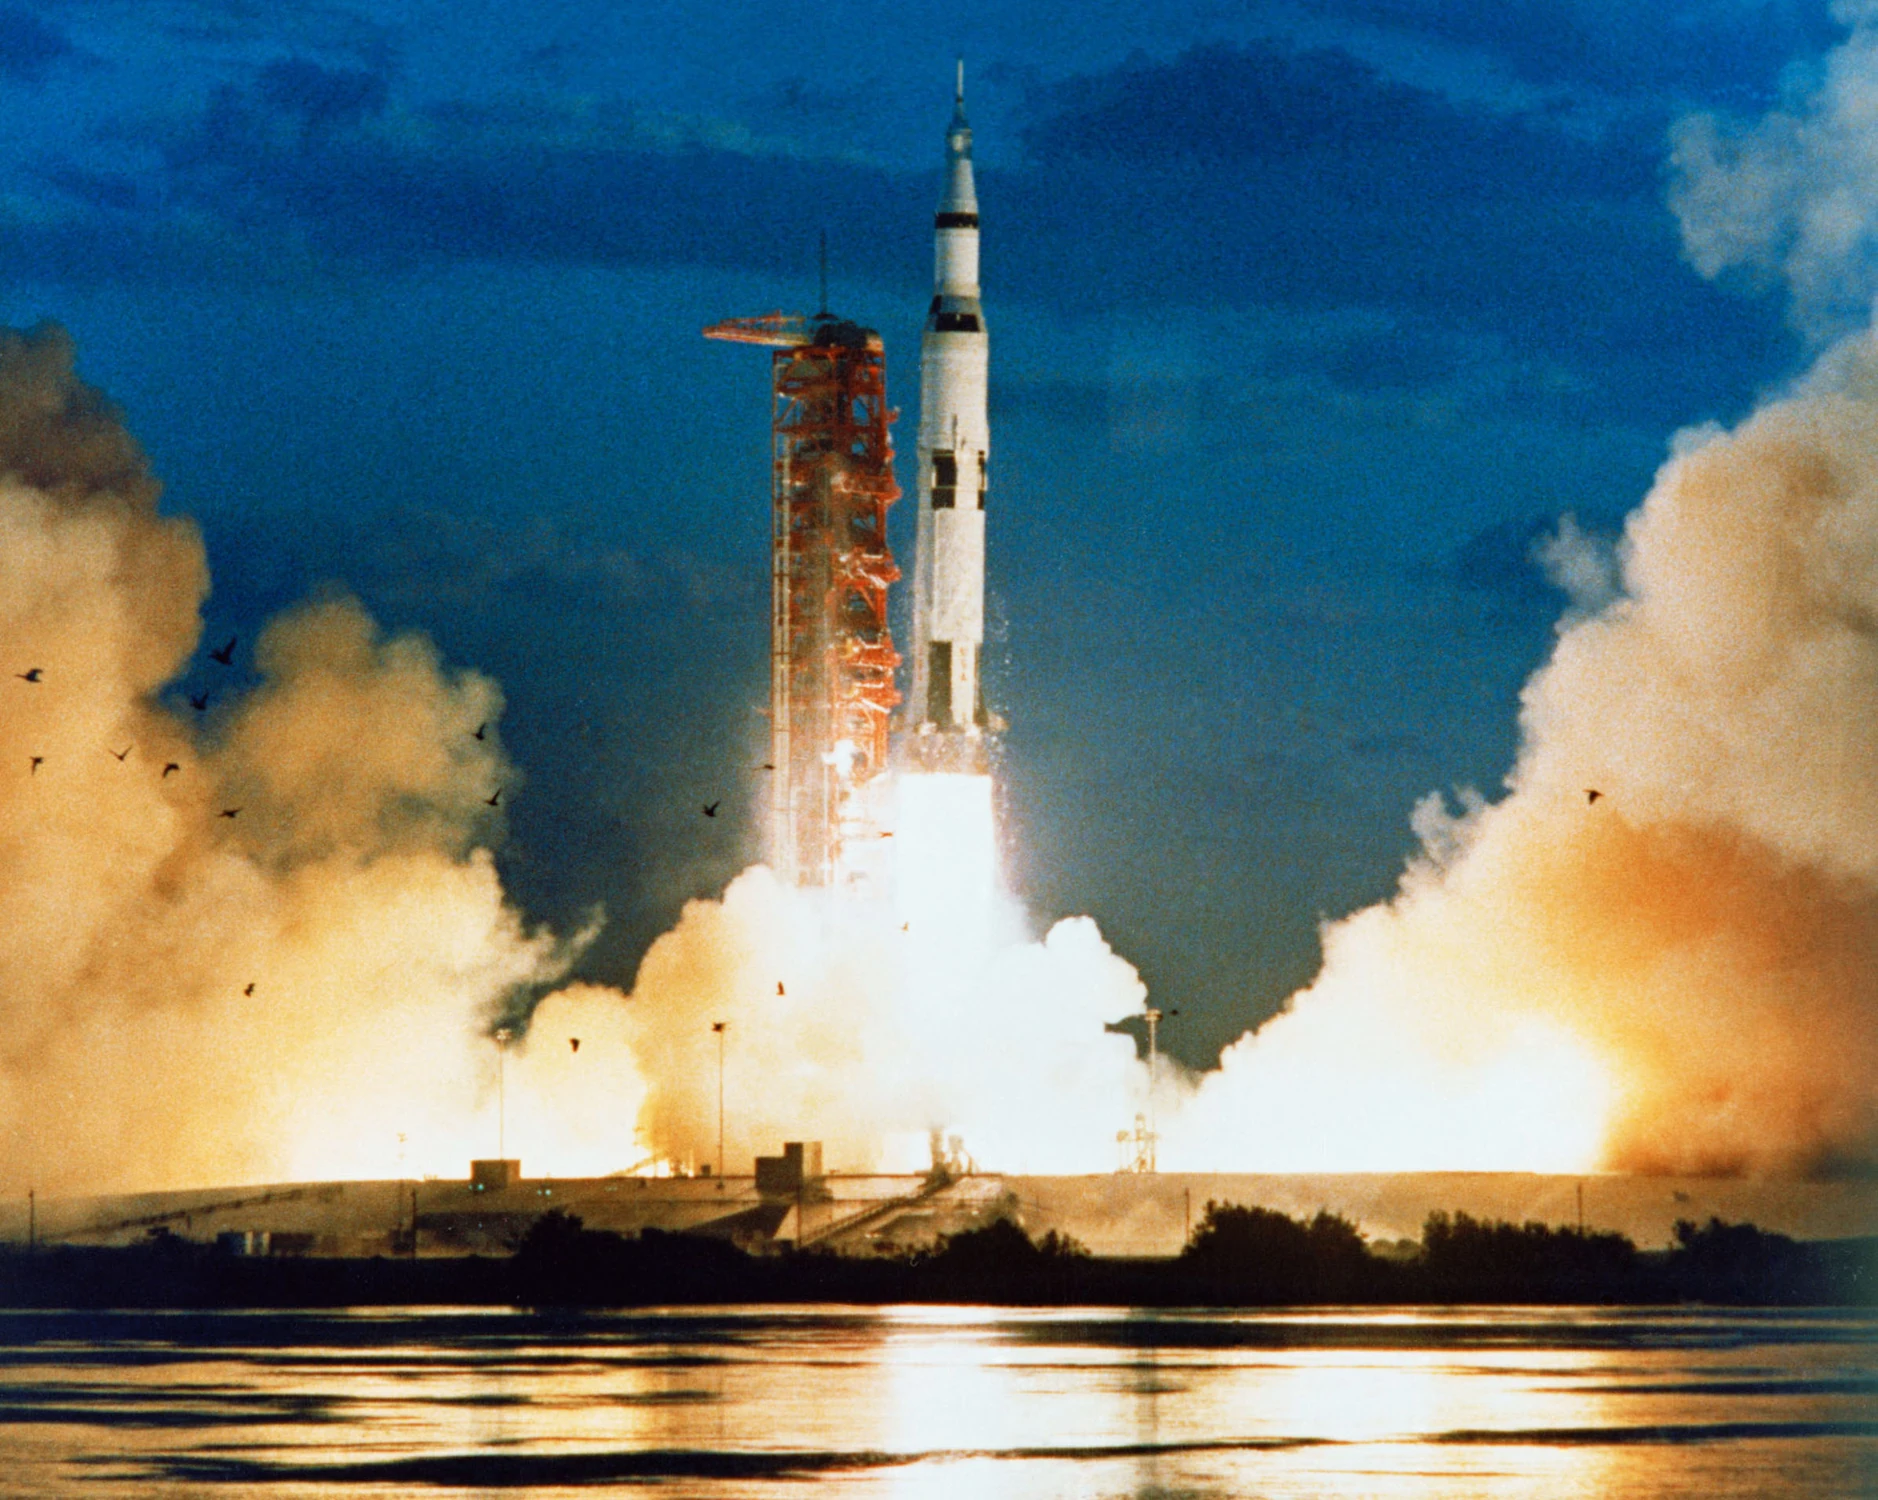 1967 was the first launch of the Saturn V rocket that later launched humans to the Moon